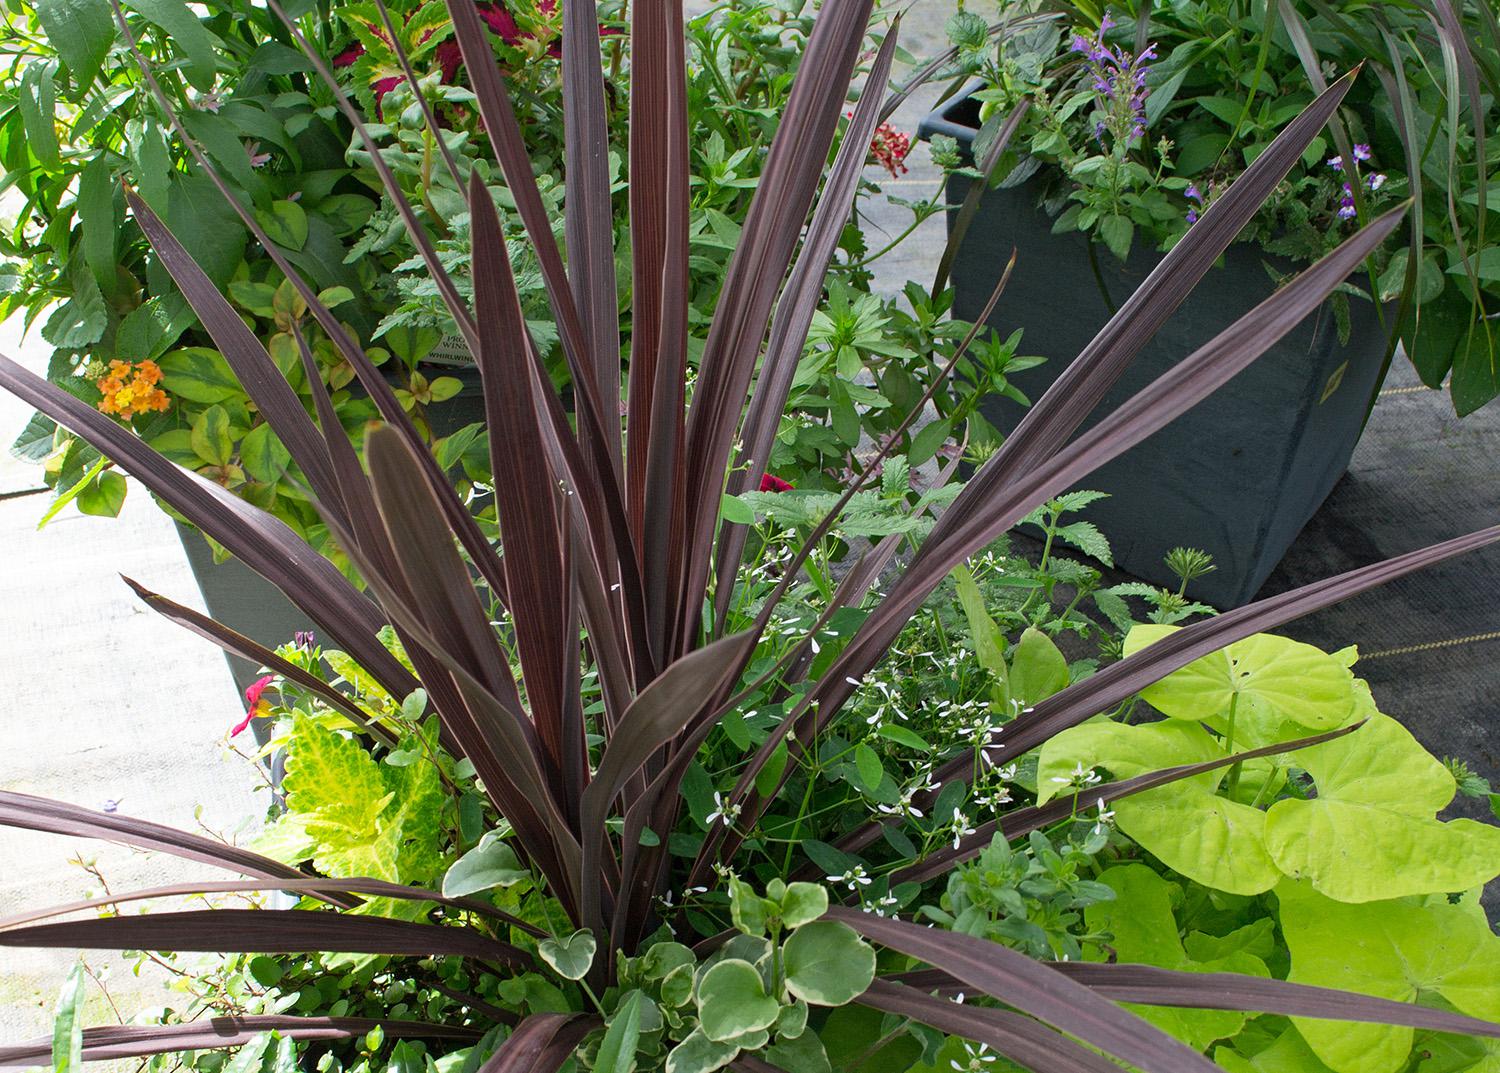 Purple sword-like leaves grow from a container of green leaves.